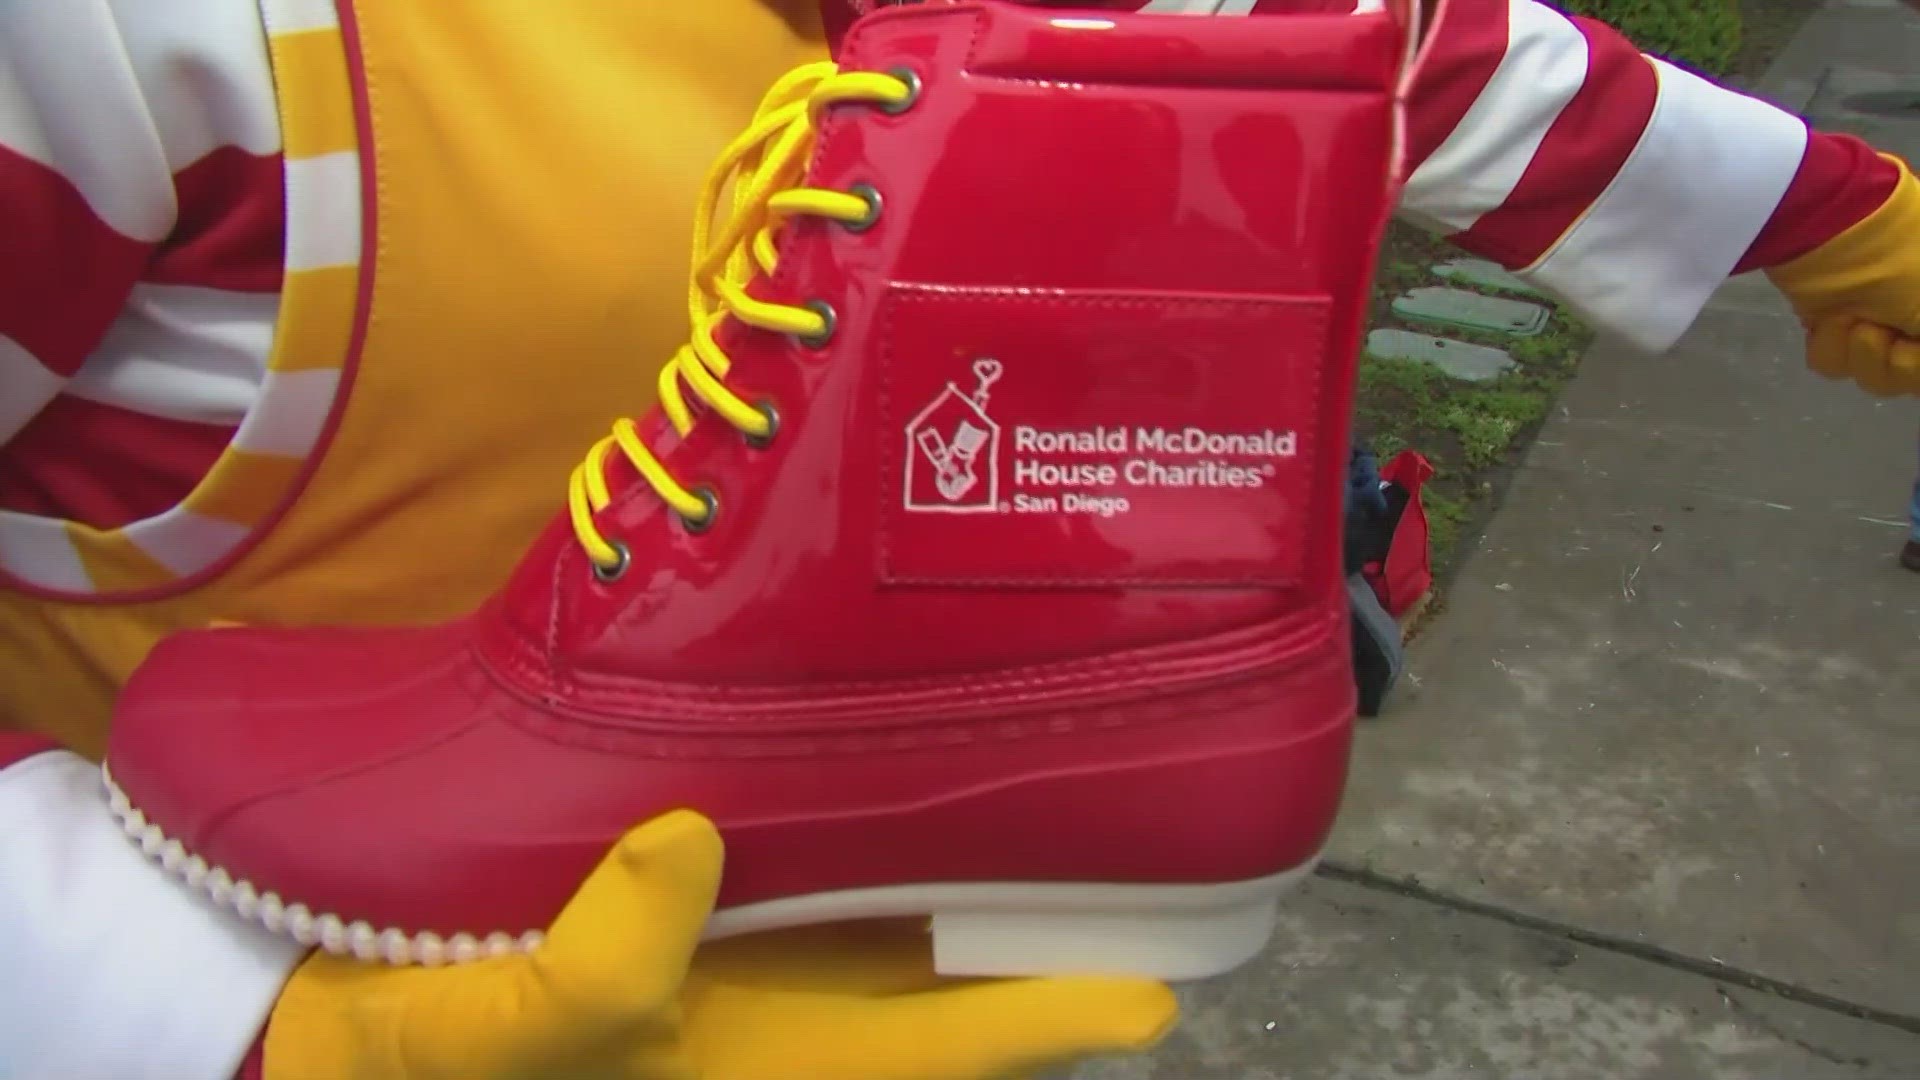 All proceeds raised on Red Shoe Day help San Diego’s Ronald McDonald House provide a home away from home for families with children in local hospitals.